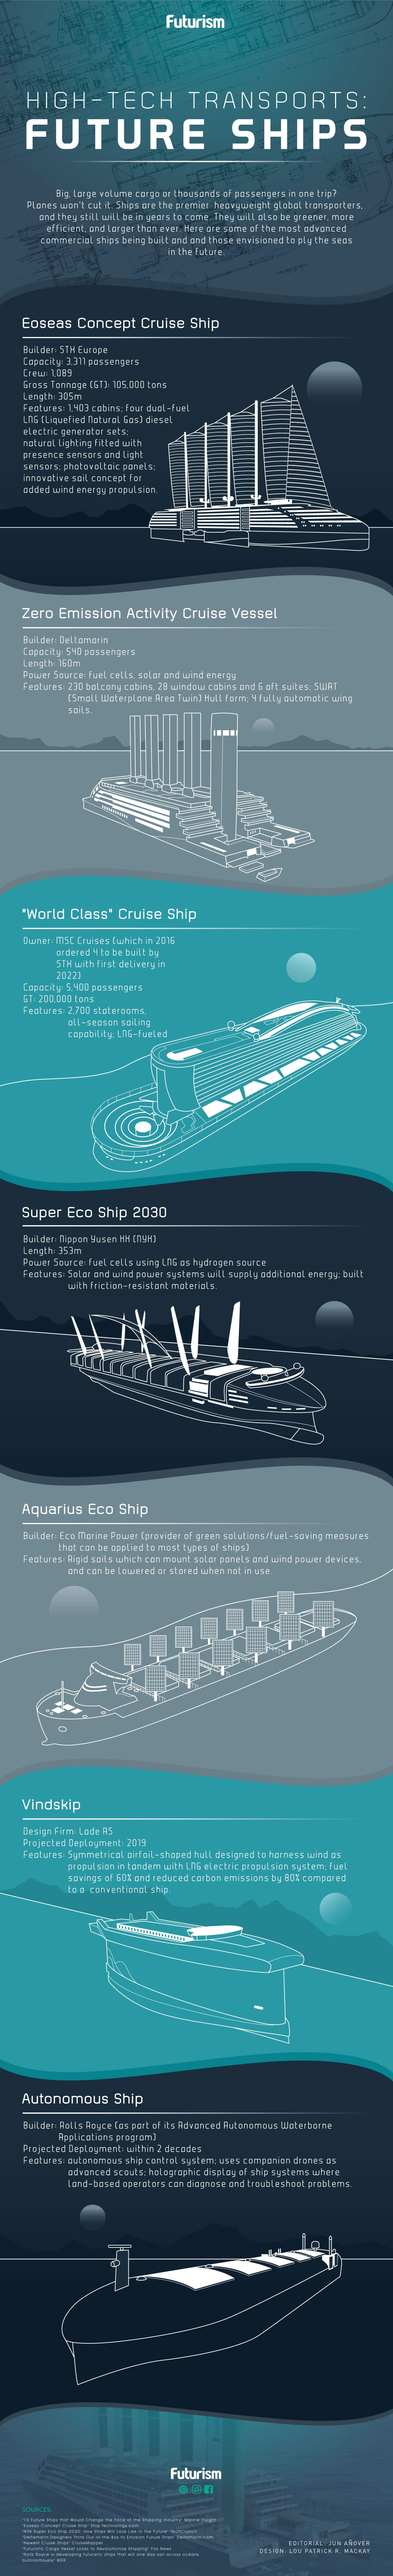 The Future of Shipping is Green and Autonomous